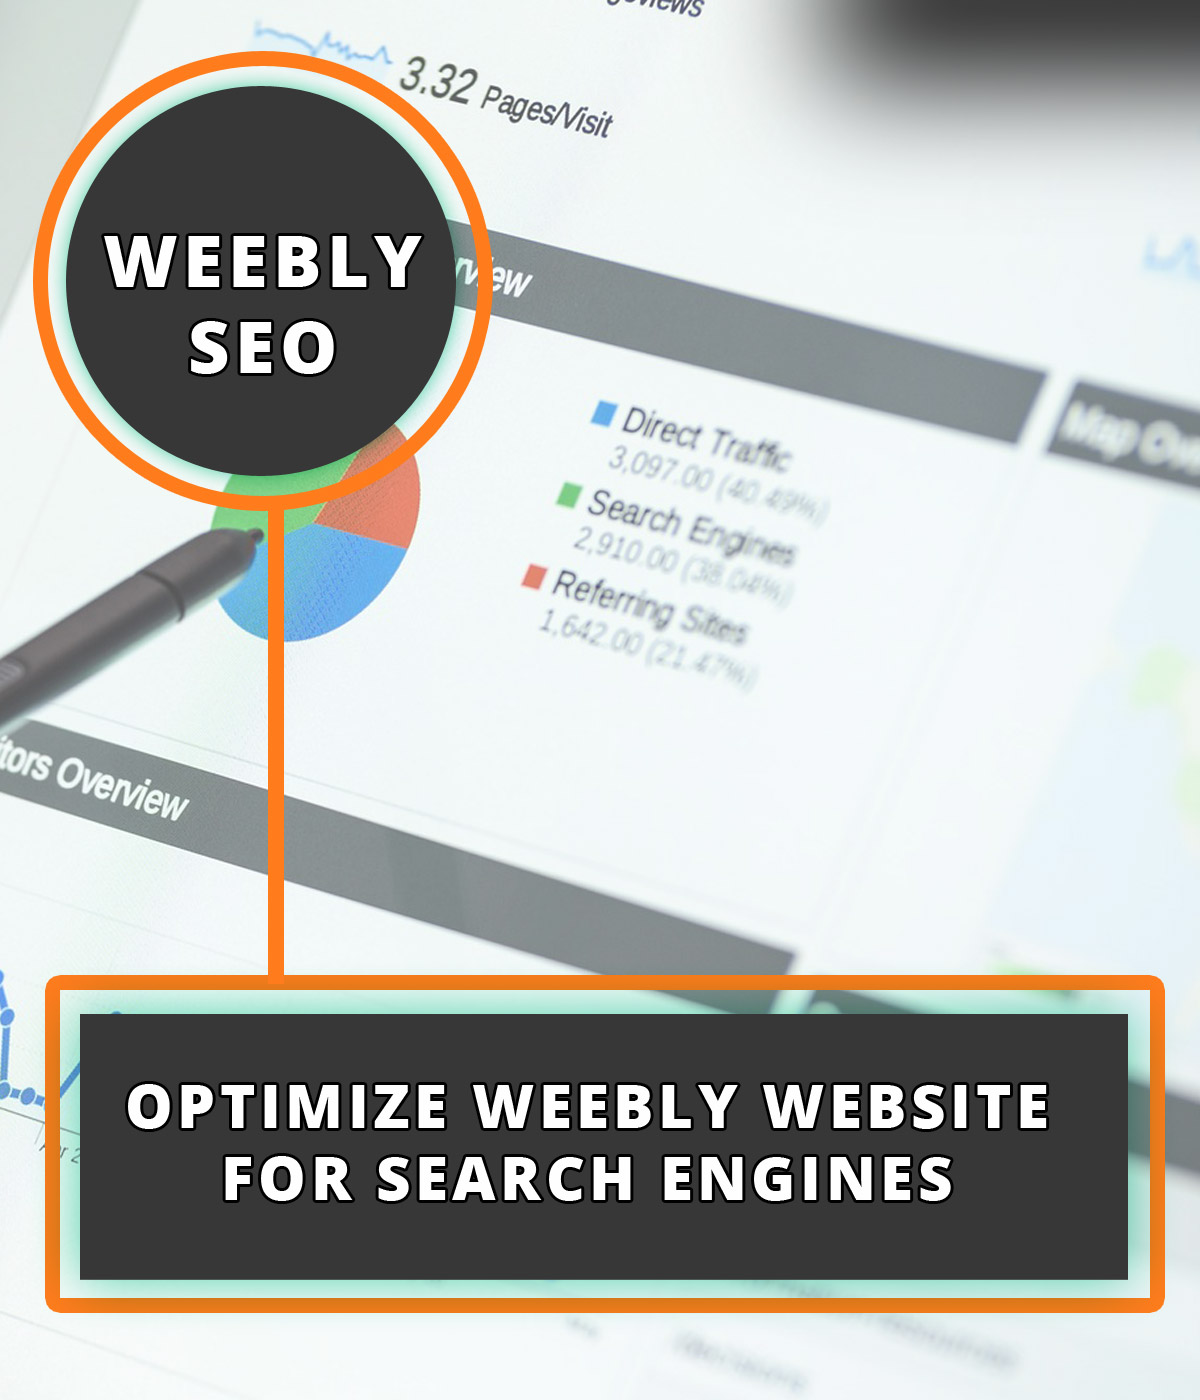 weebly seo - optimize weebly website to rank higher